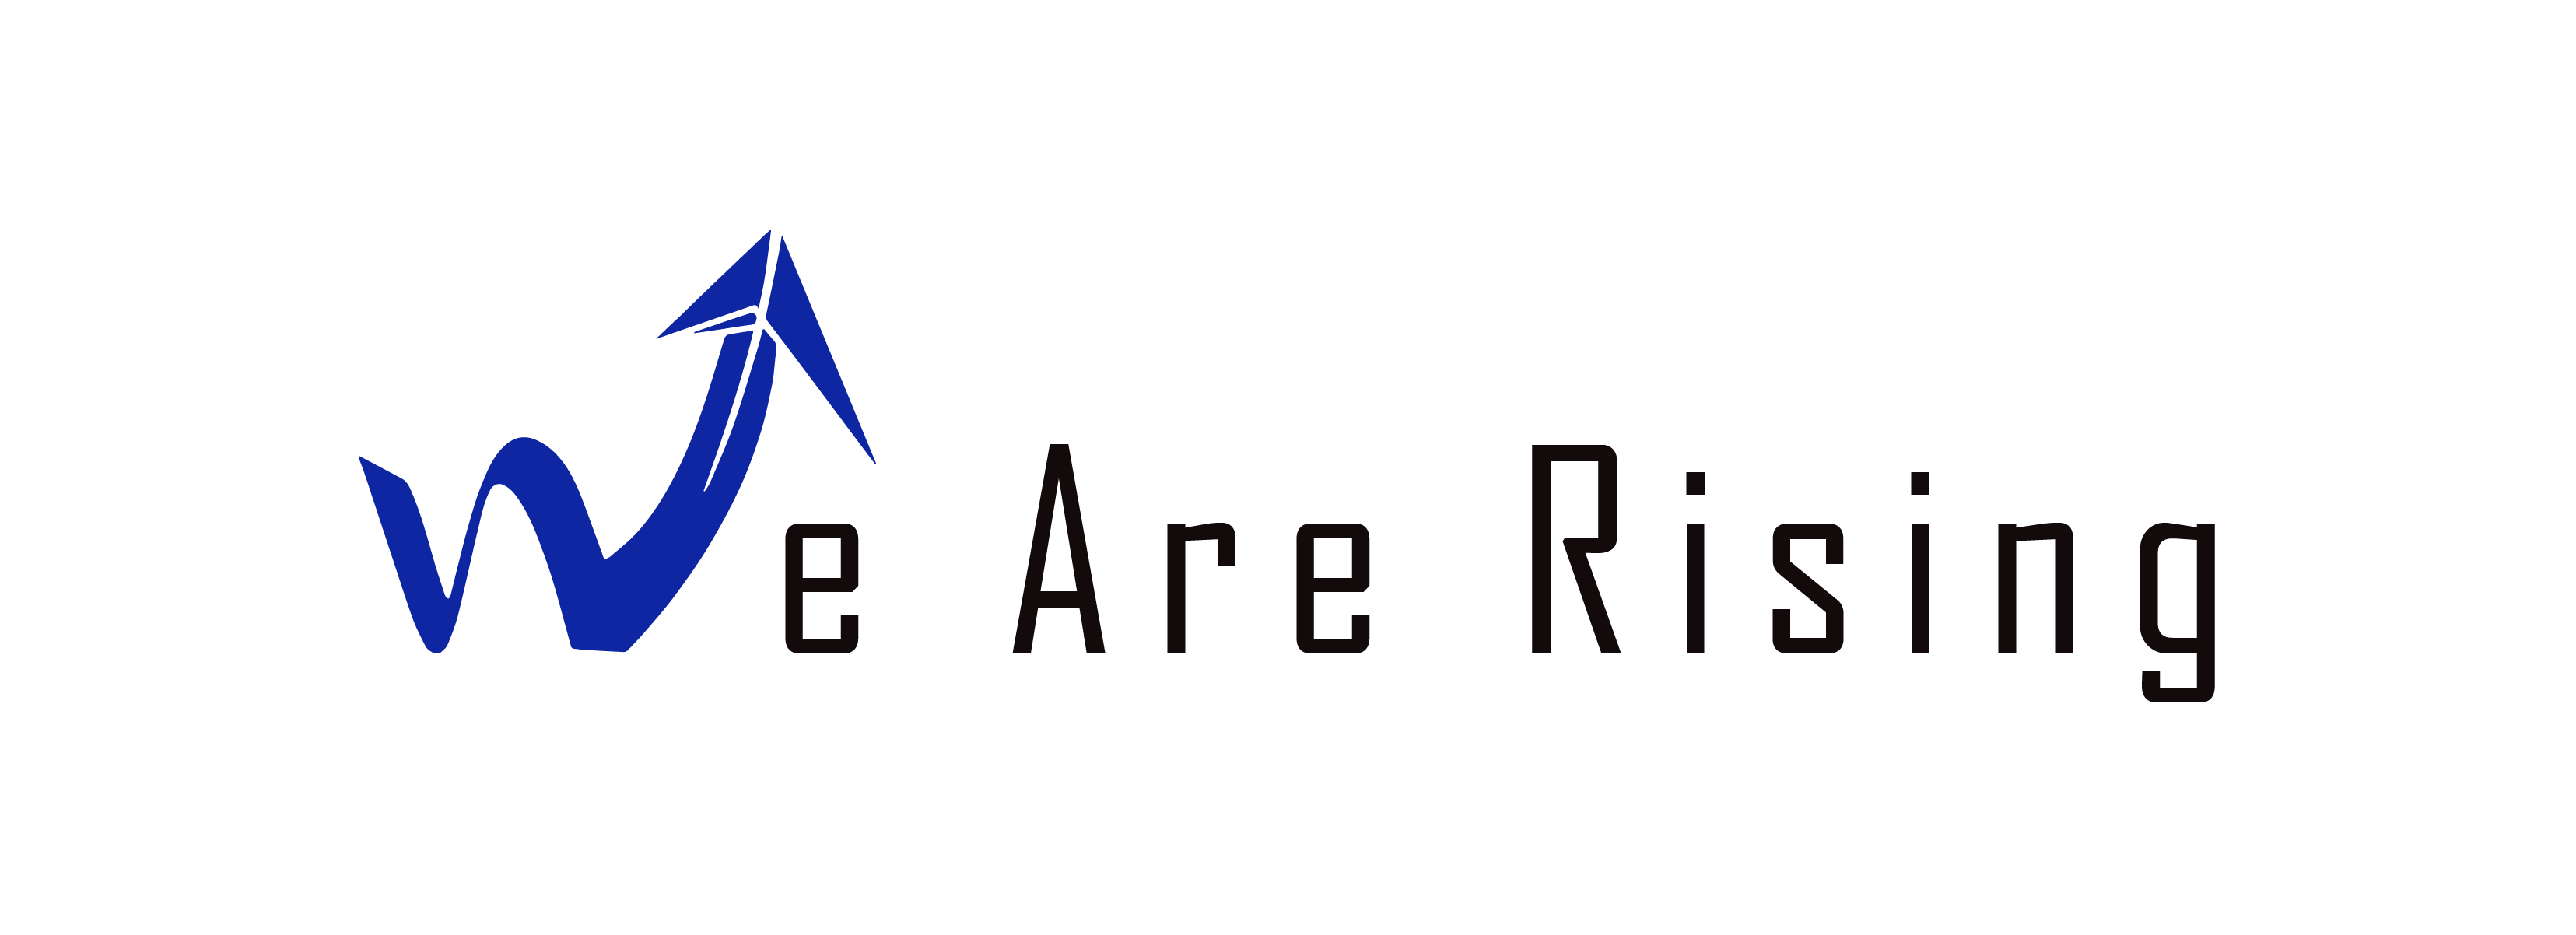 We Are Rising Interactive